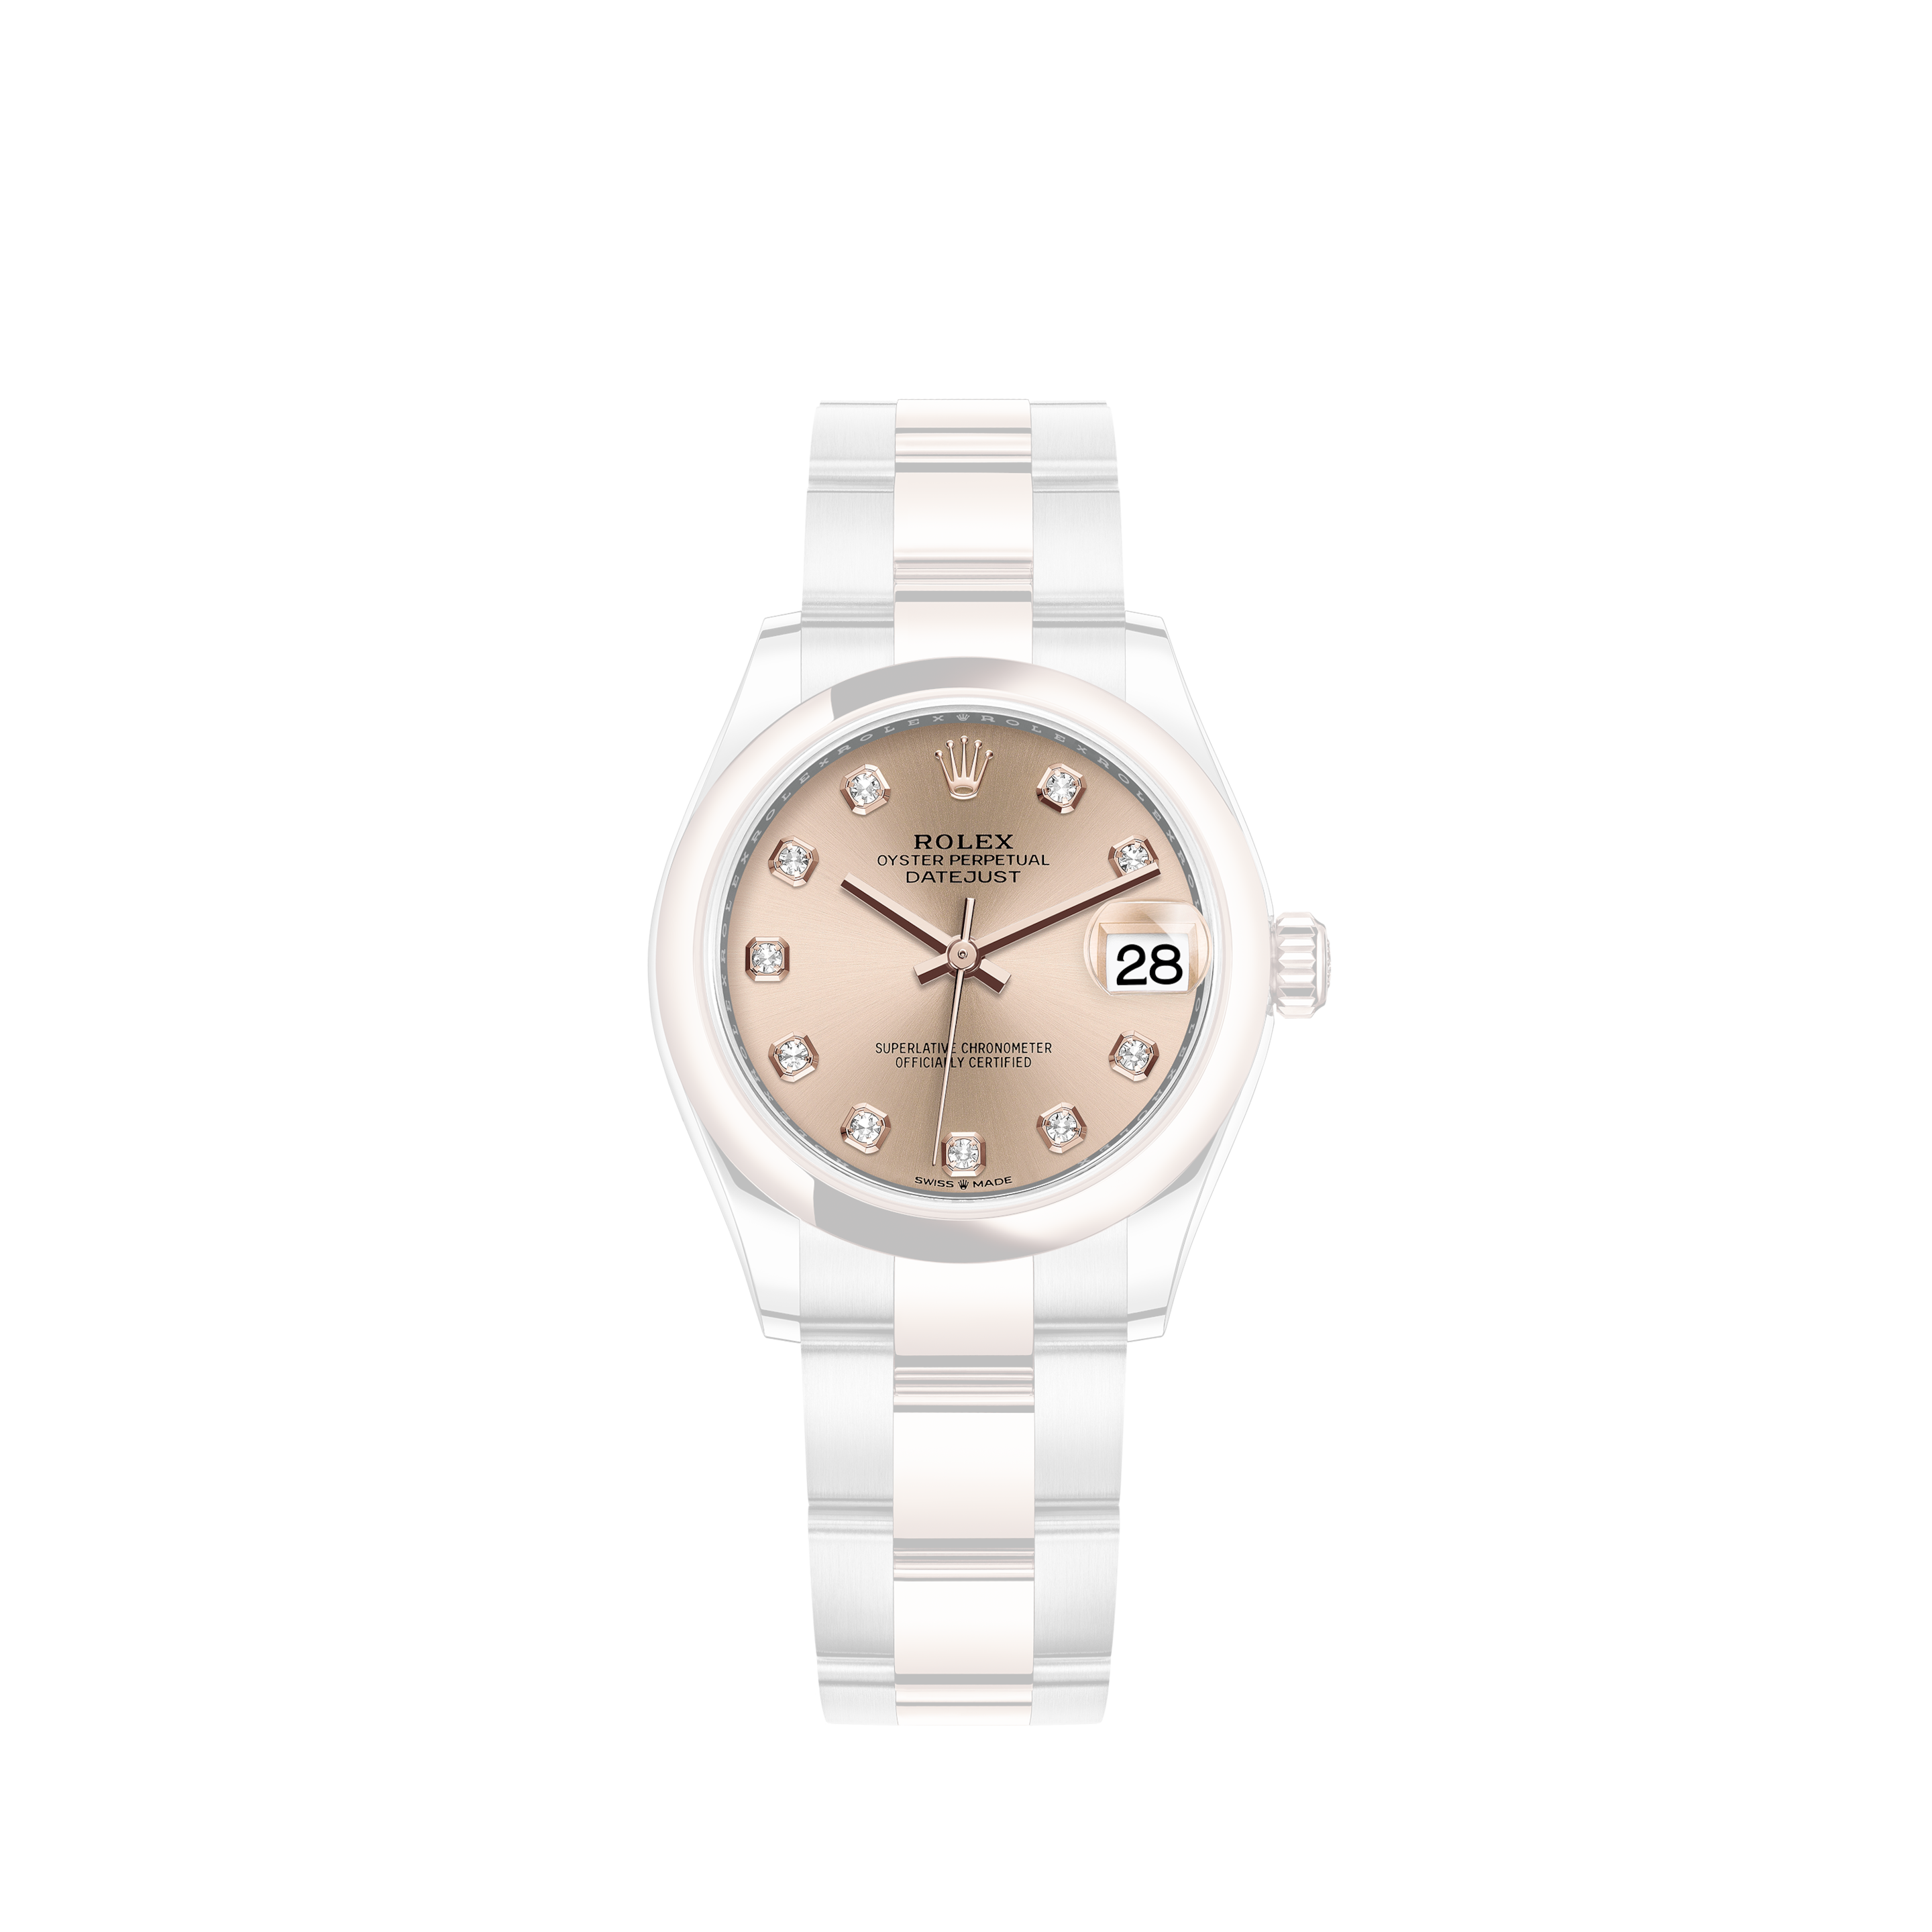 Rolex Oyster Perpetual Date, silver linnen dial